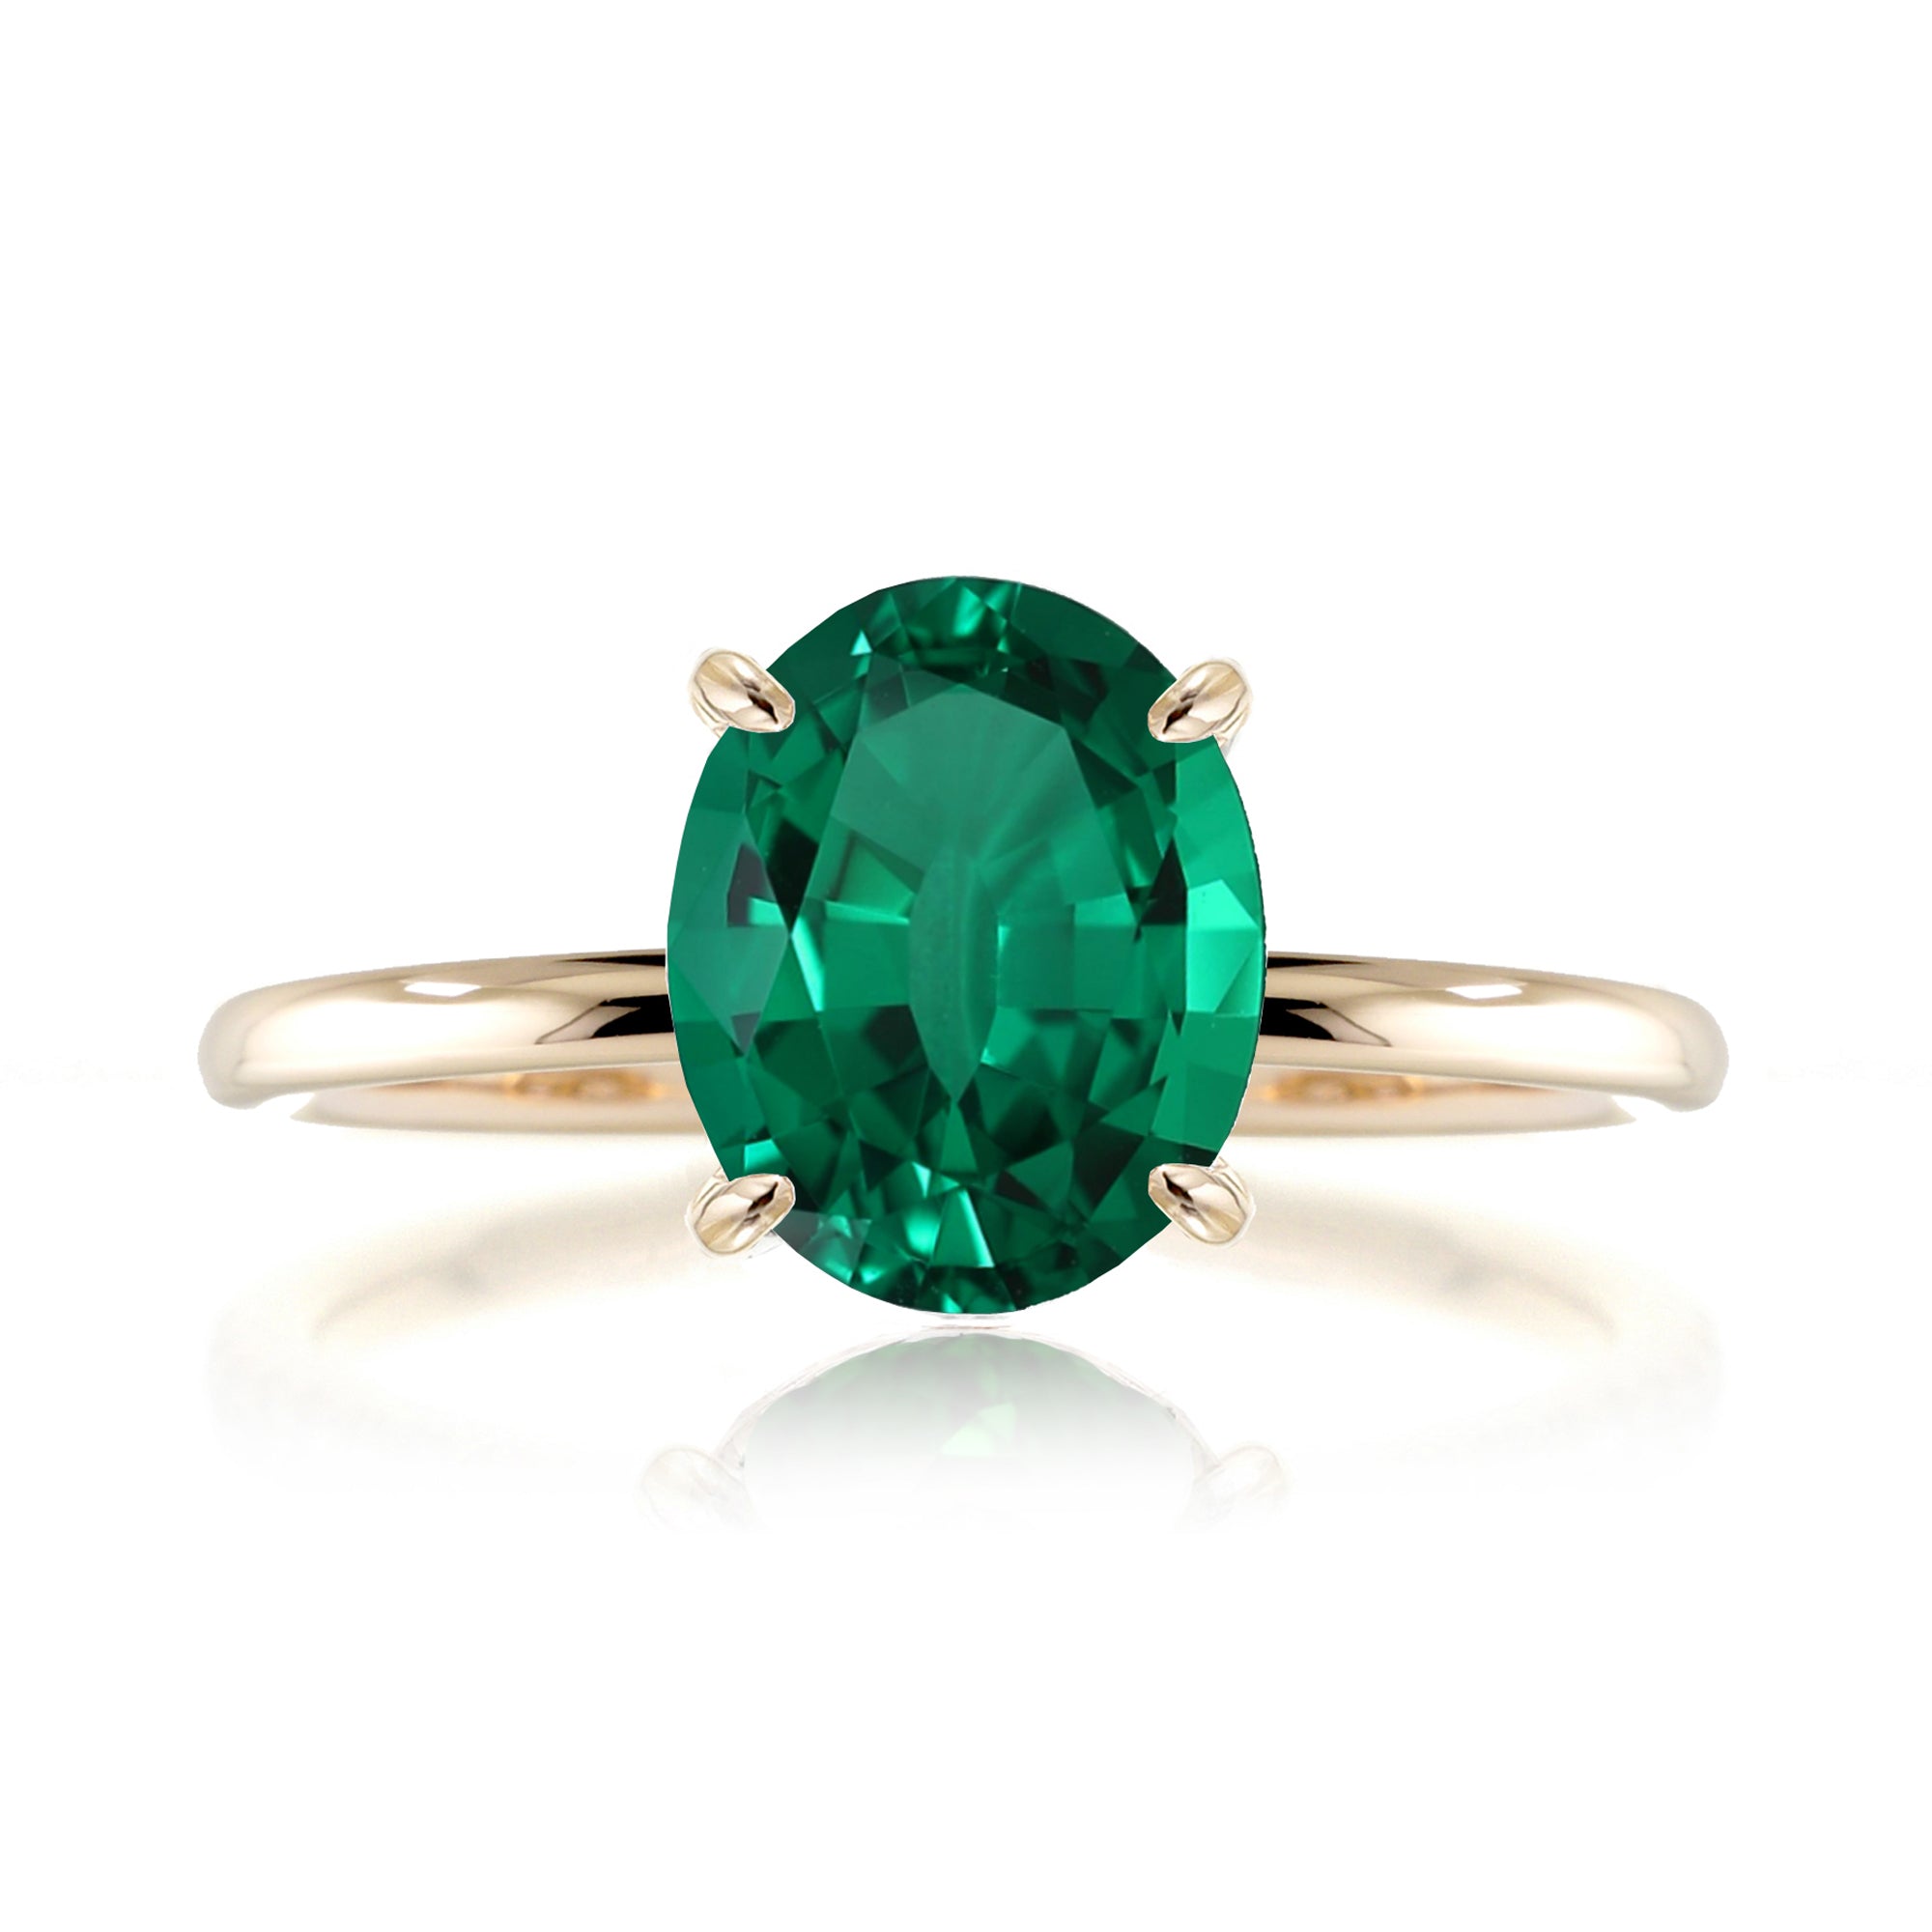 Oval green emerald solid band engagement ring yellow gold - the Ava